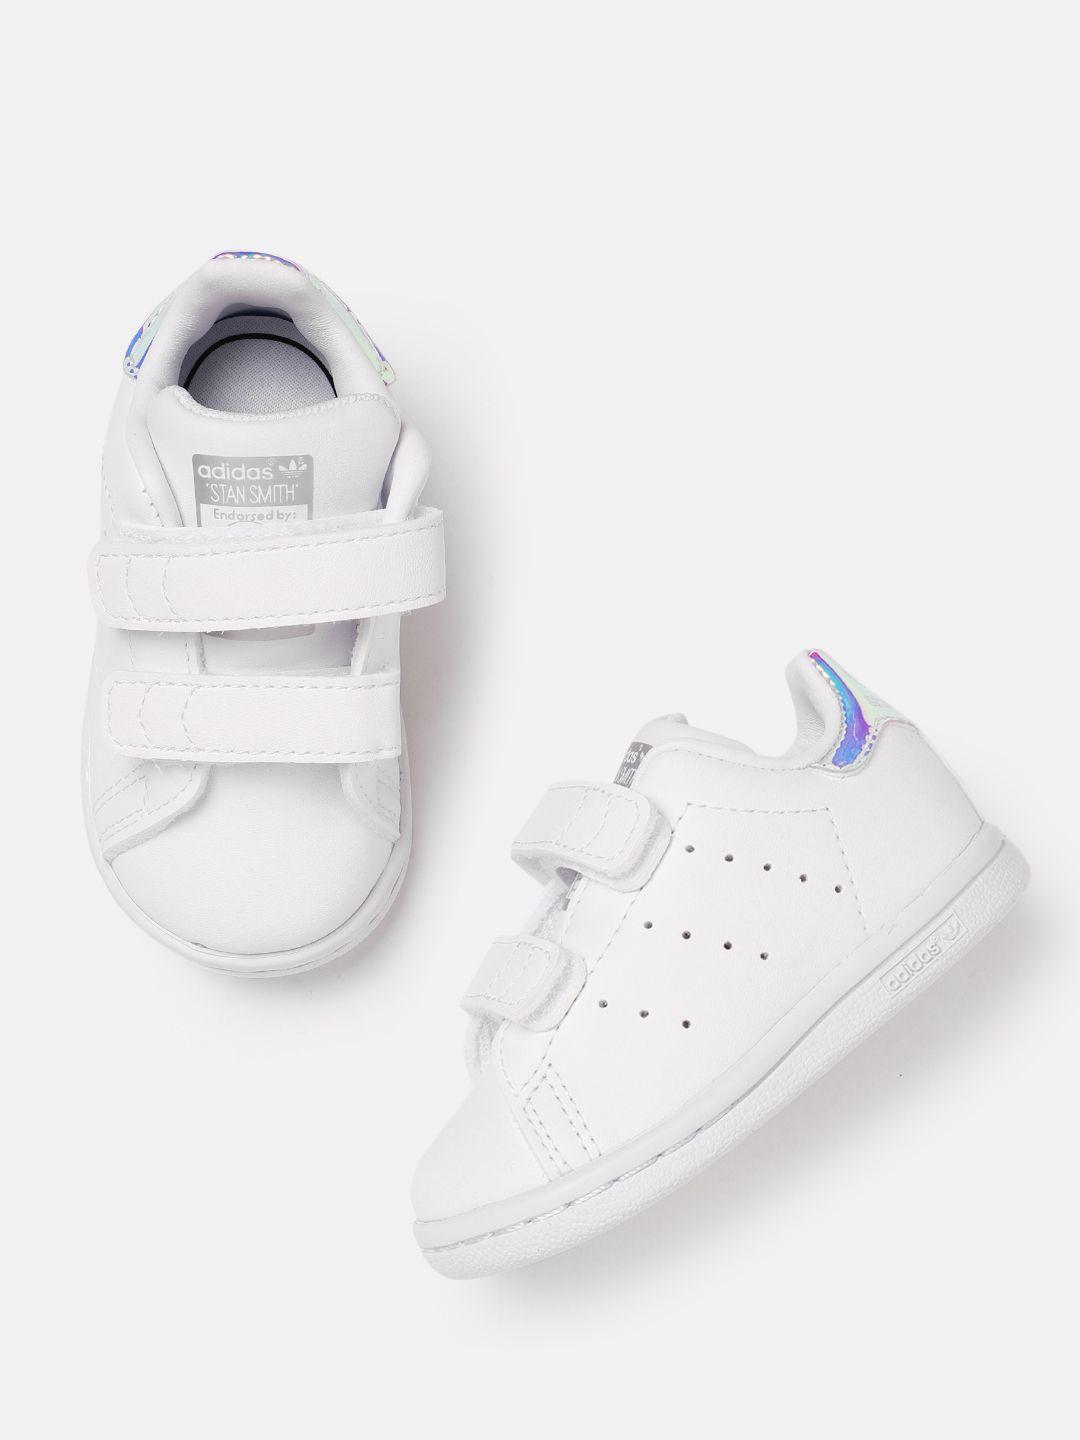 adidas-kids-perforated-stan-smith-sneakers